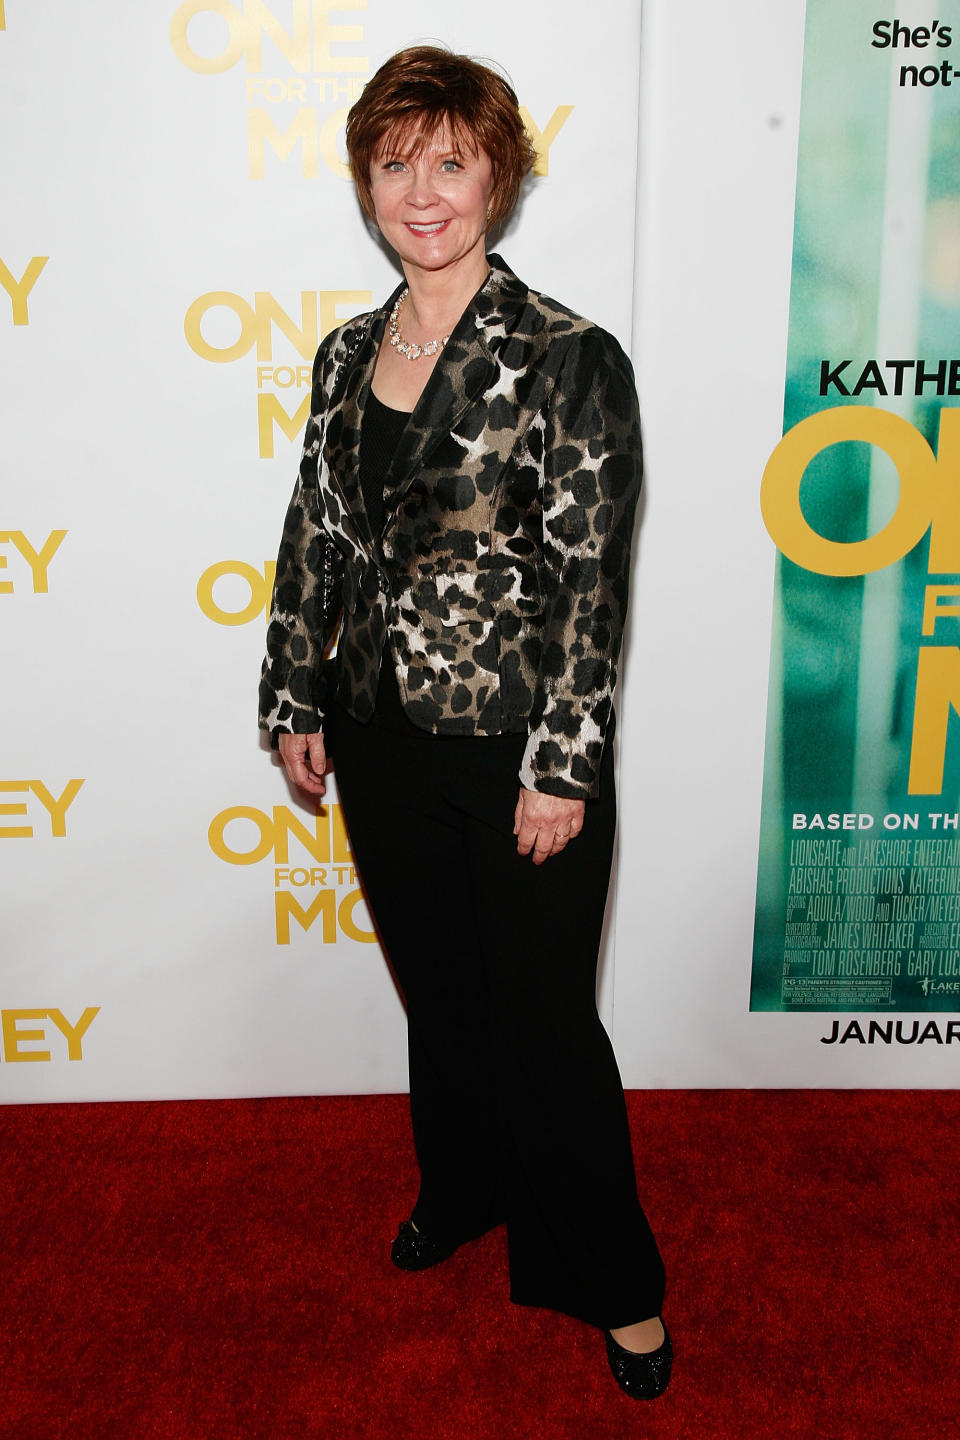 "One For The Money" New York Premiere - Inside Arrivals